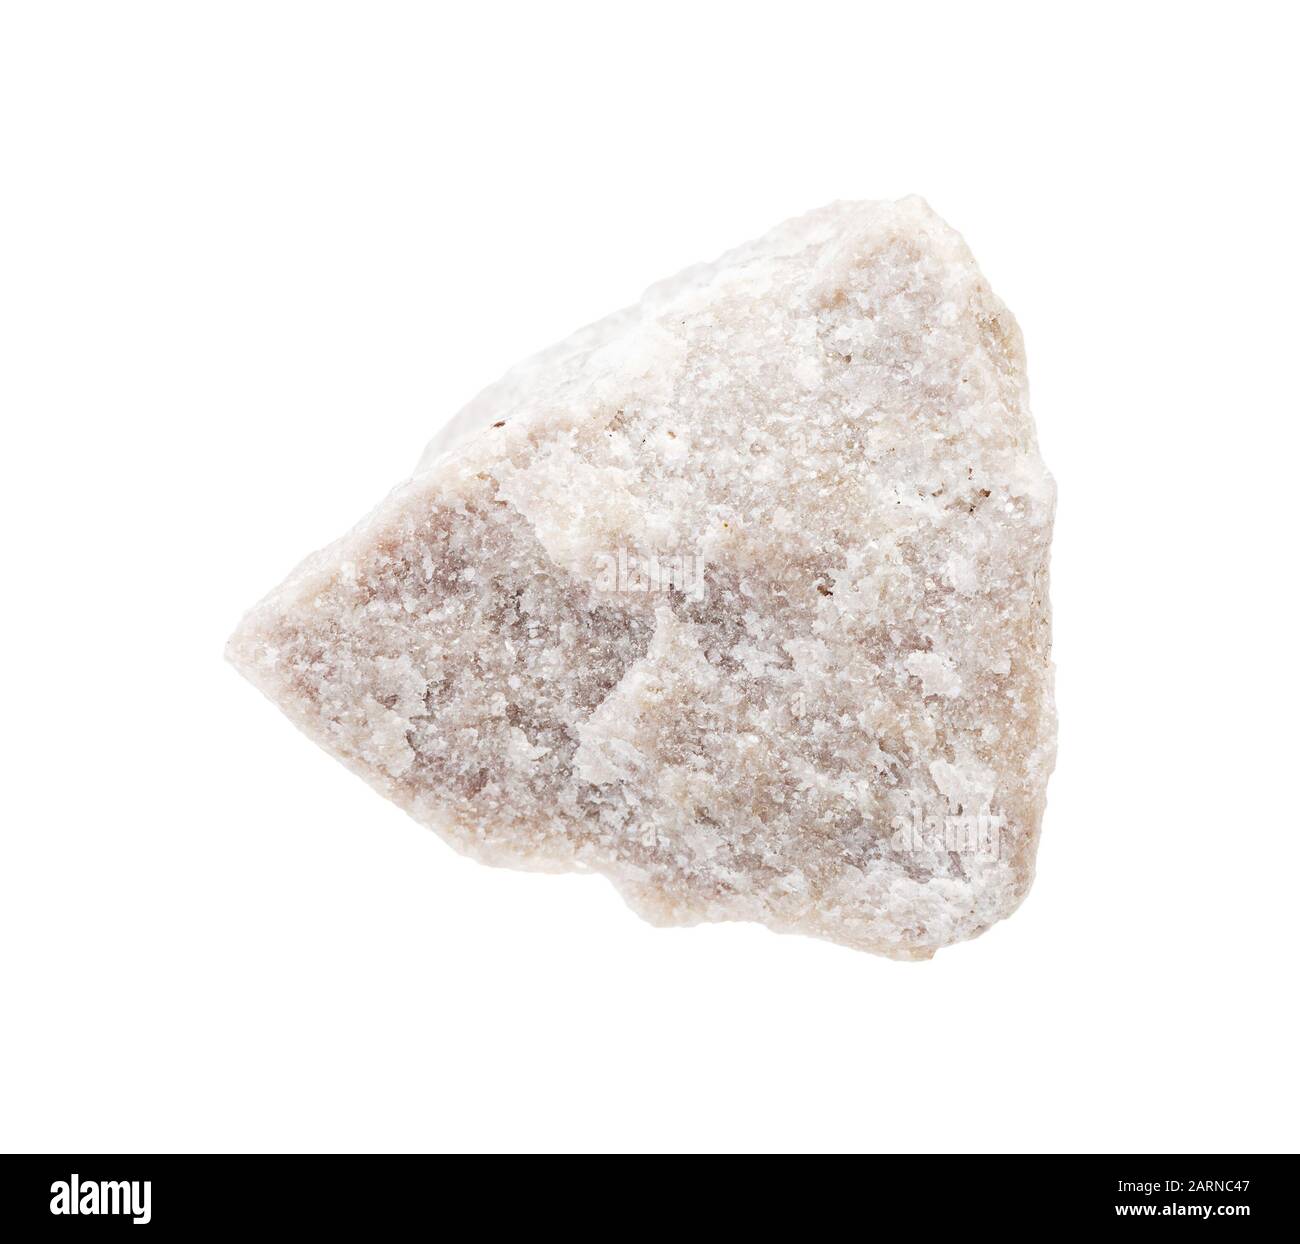 closeup of sample of natural mineral from geological collection - unpolished dolomite rock isolated on white background Stock Photo